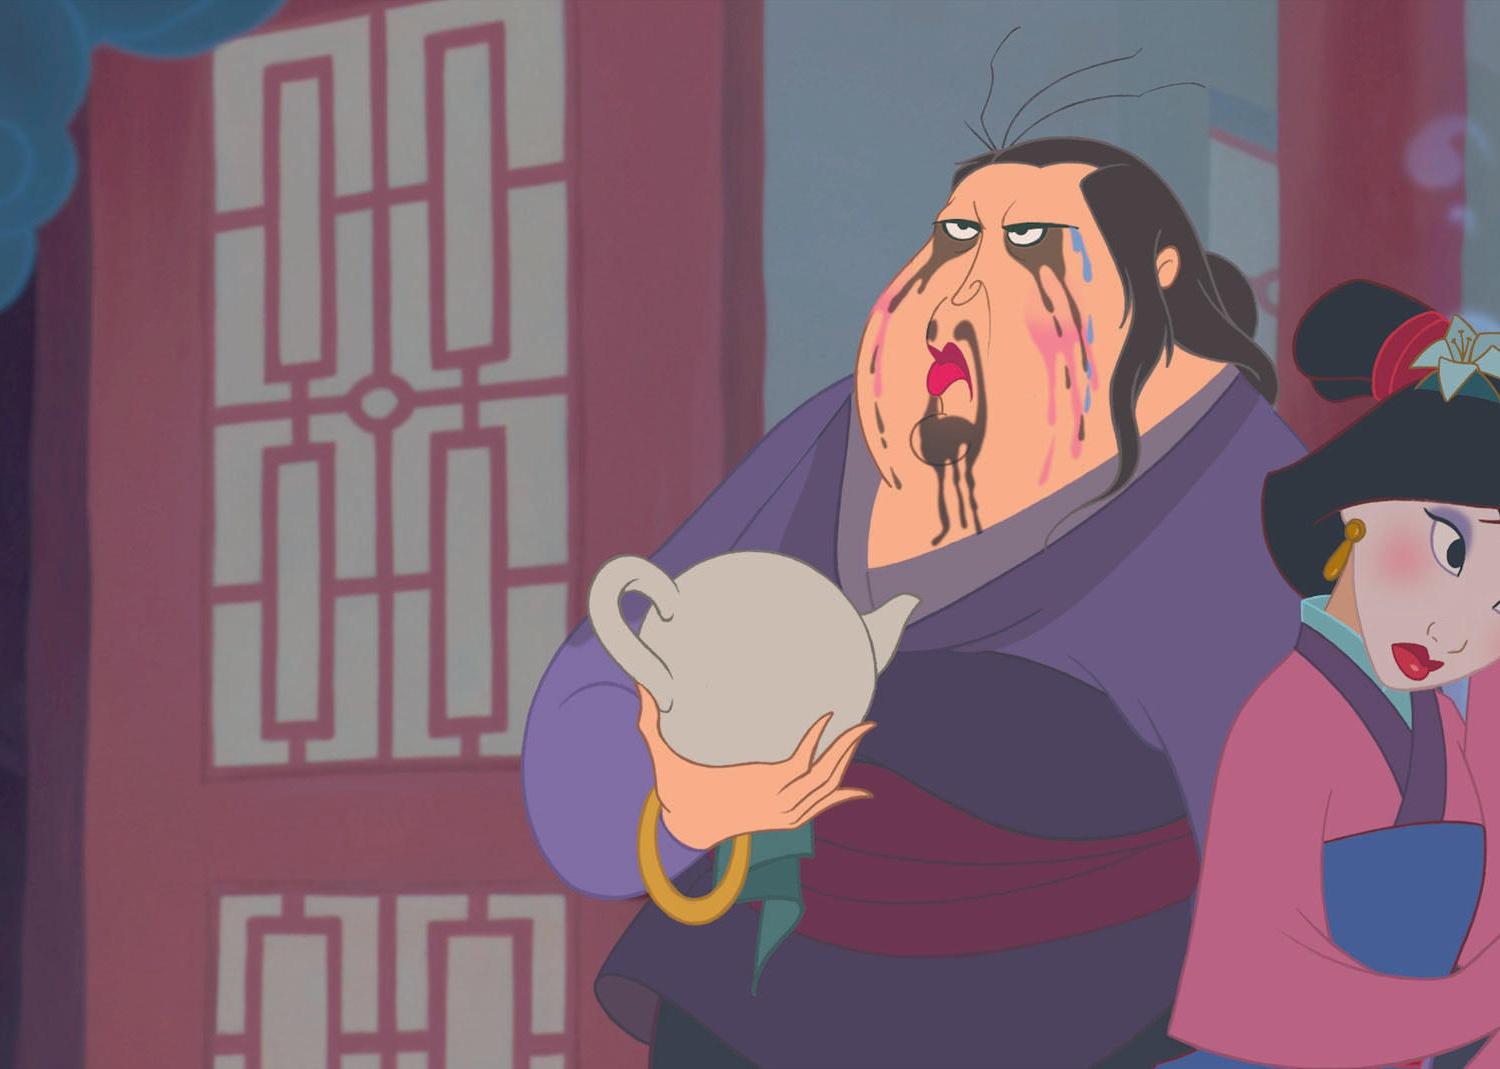 A animated image of Mulan looking embarrassed next to an older man with something all over his face while holding a teapot.